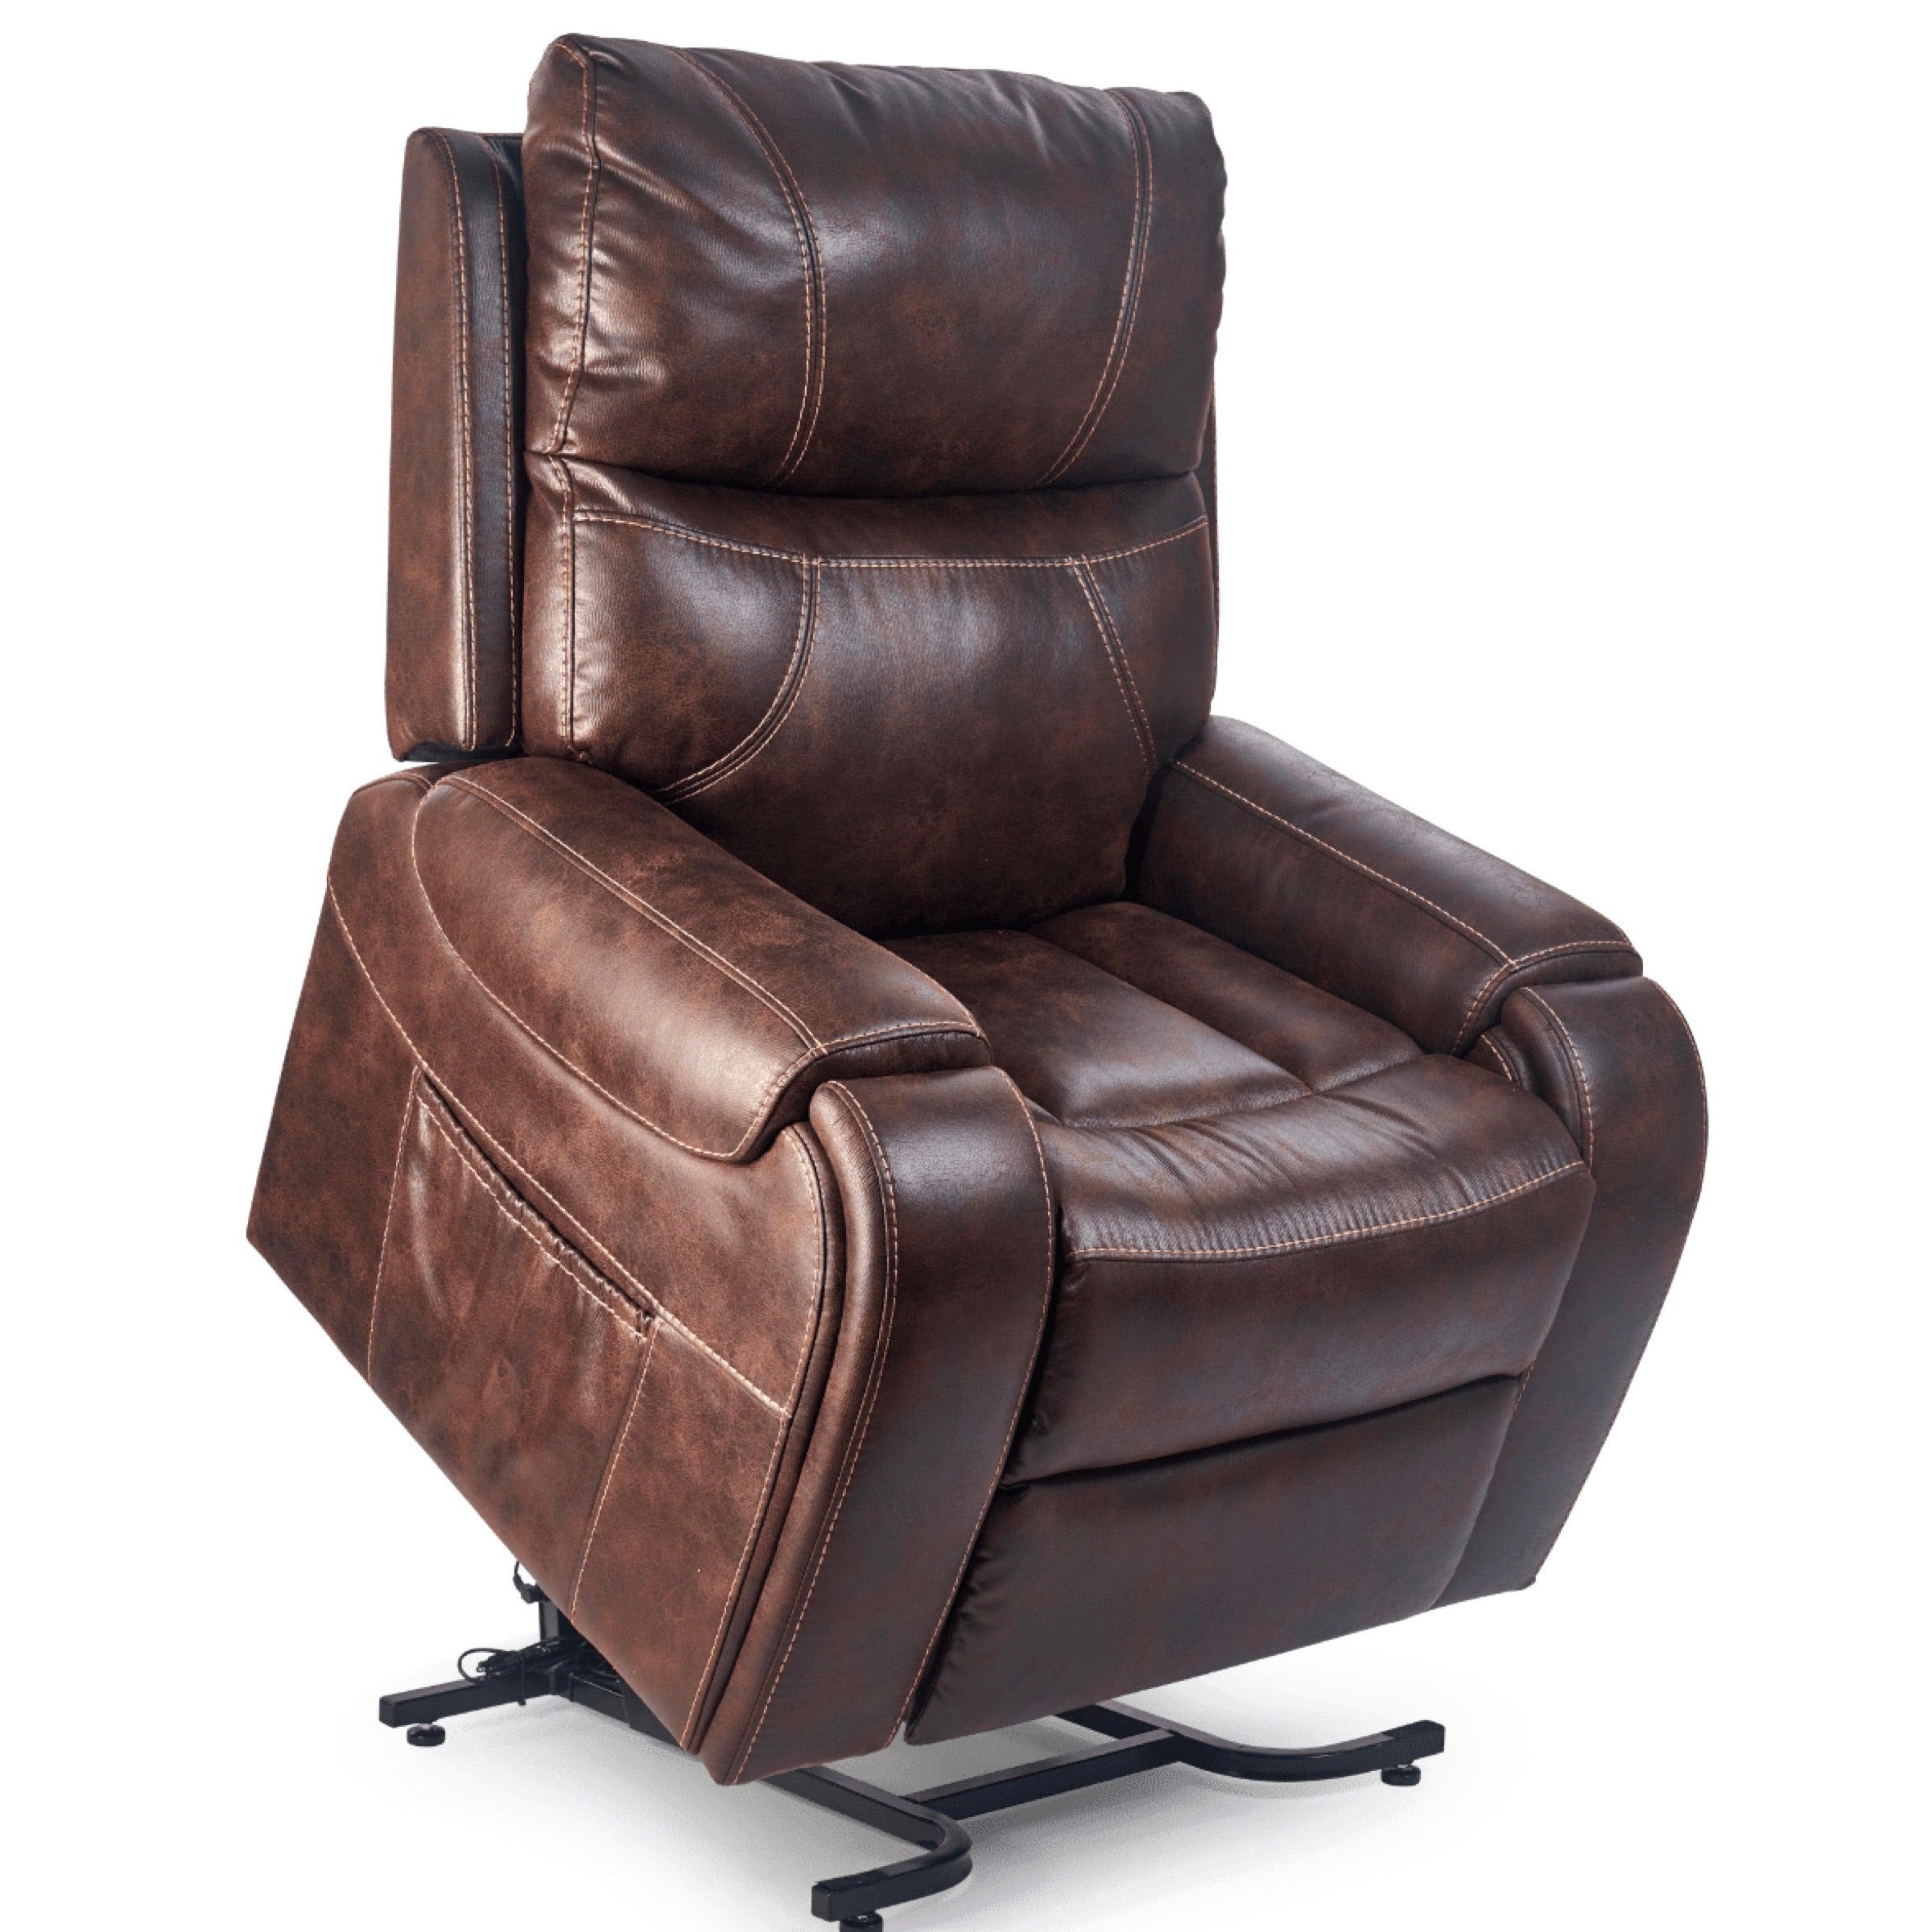 Sedona Lift Chair Power Recliner, lifted angle